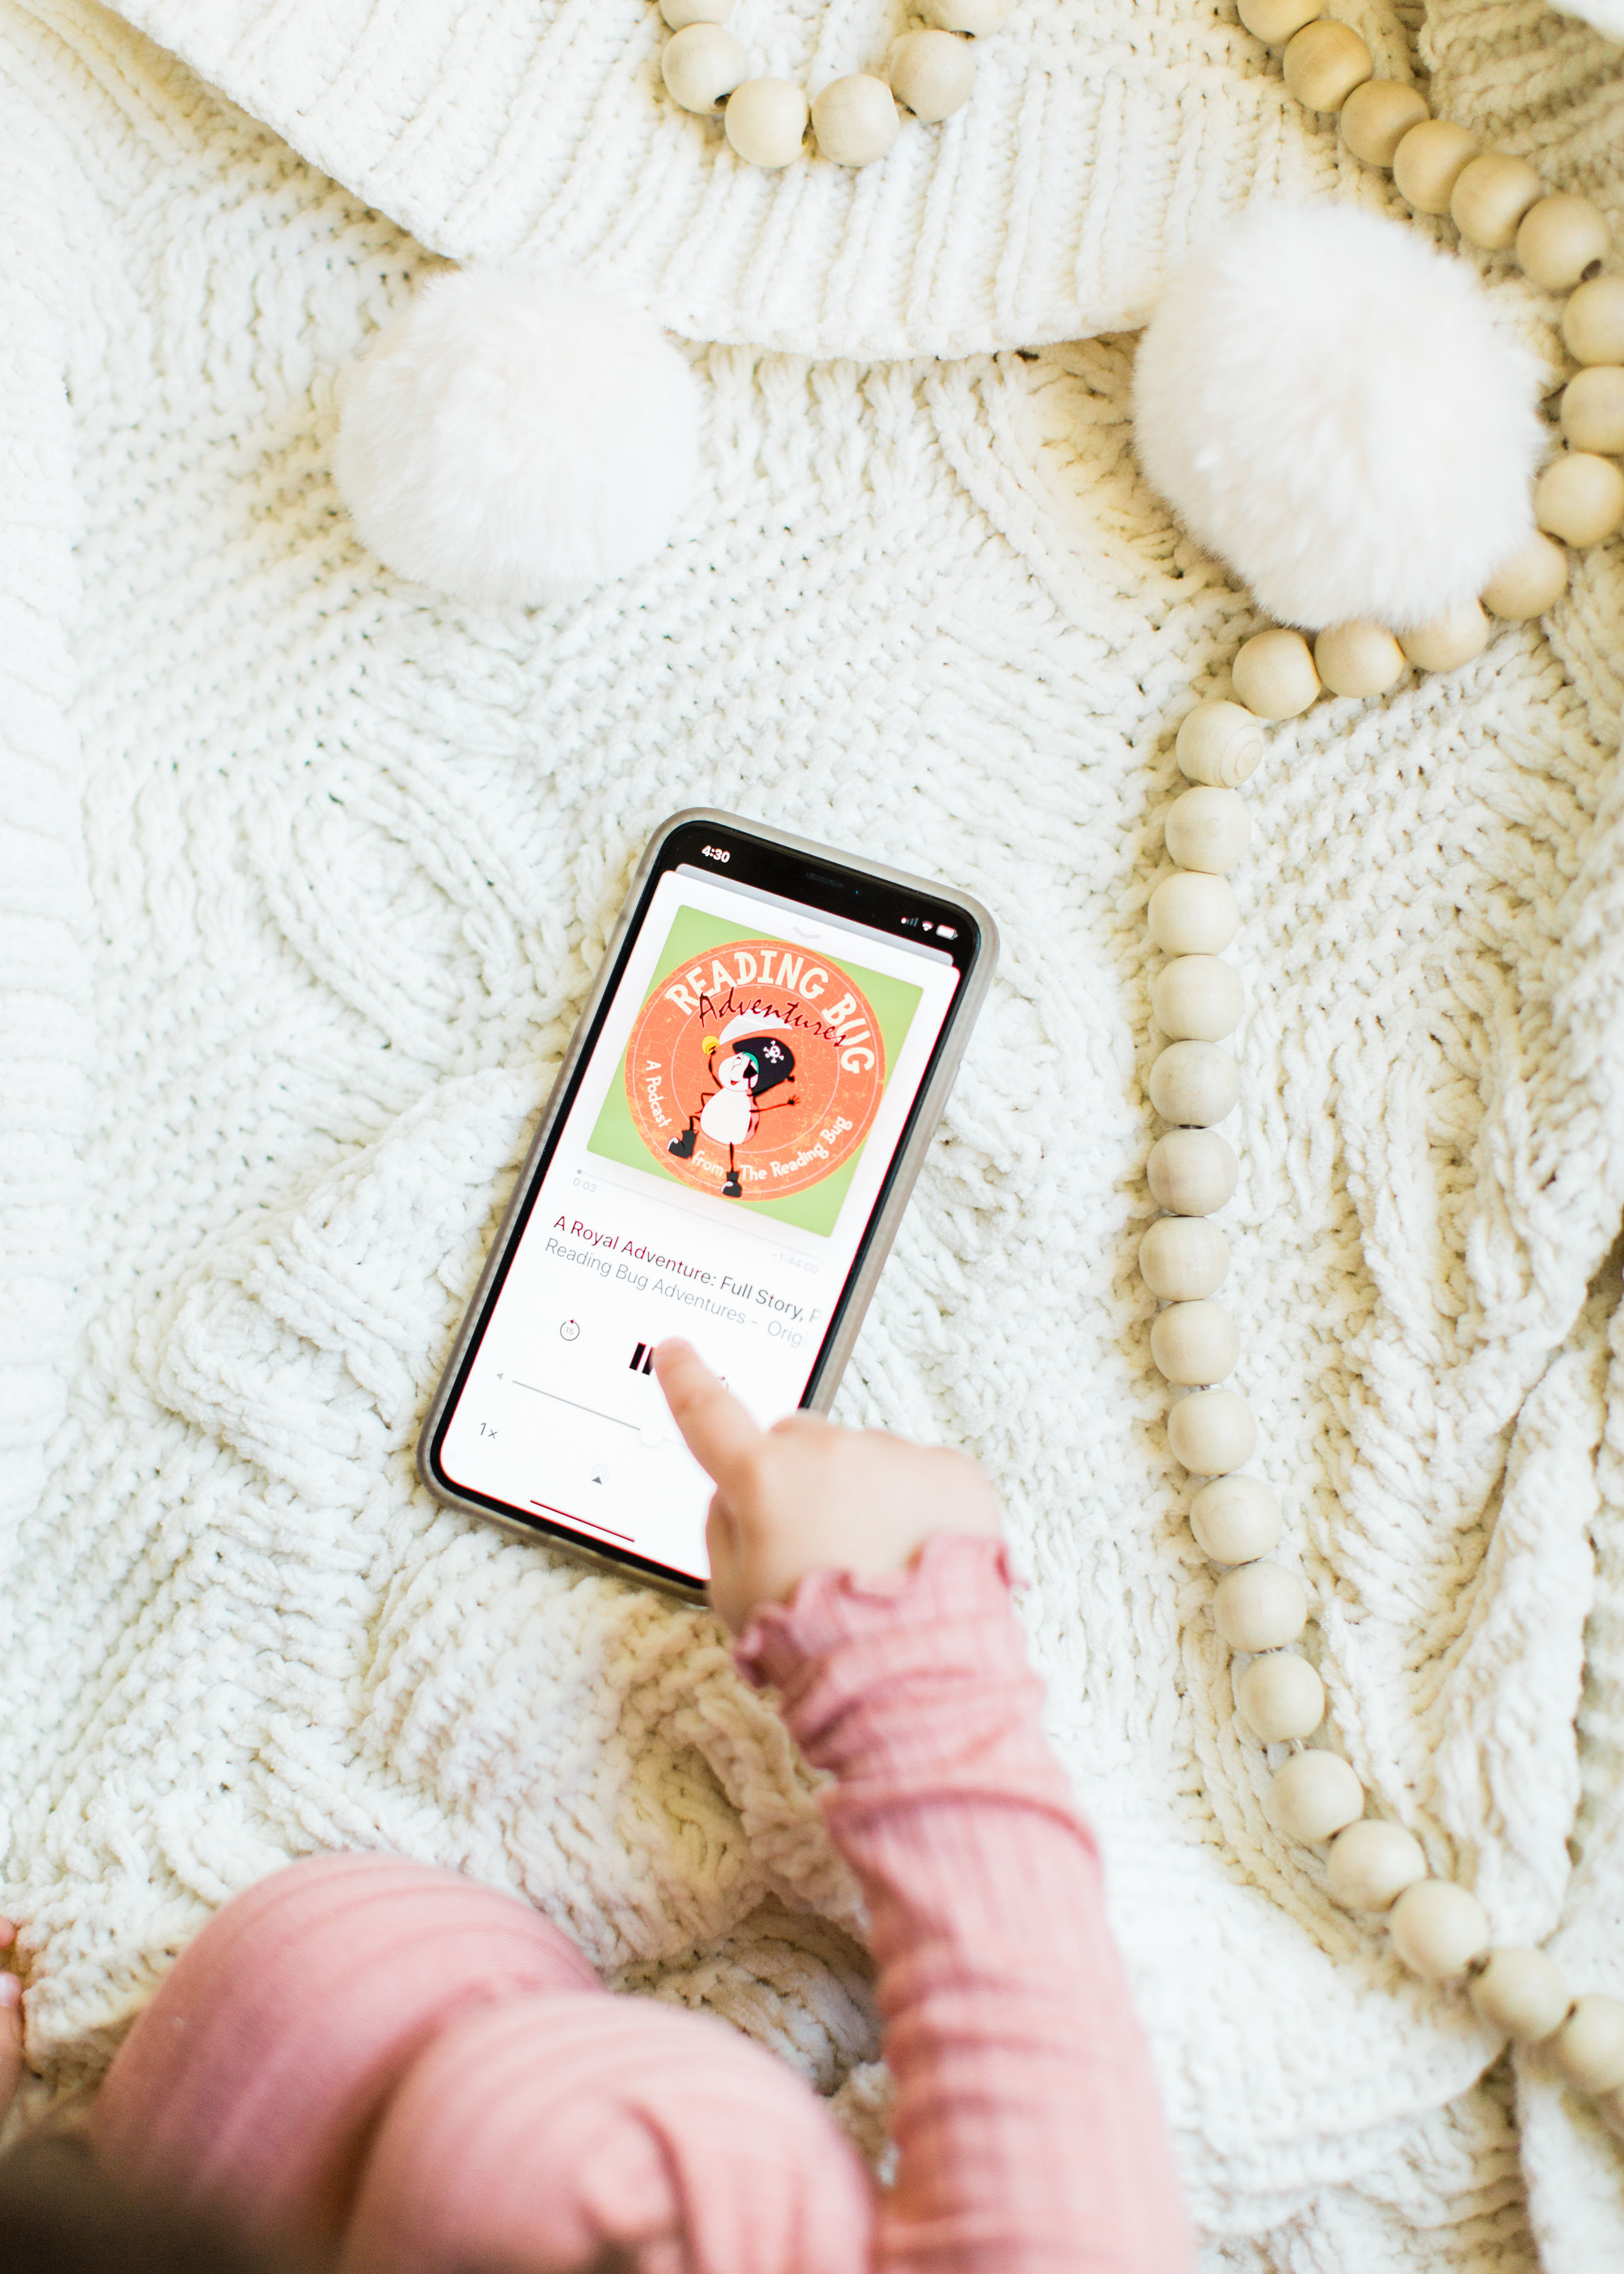 Podcasts are an amazing learning tool, help avoid screen time, are perfect for road trips, keep kids wildly entertained, and are totally free! | Click through for the details. | glitterinc.com | @glitterinc